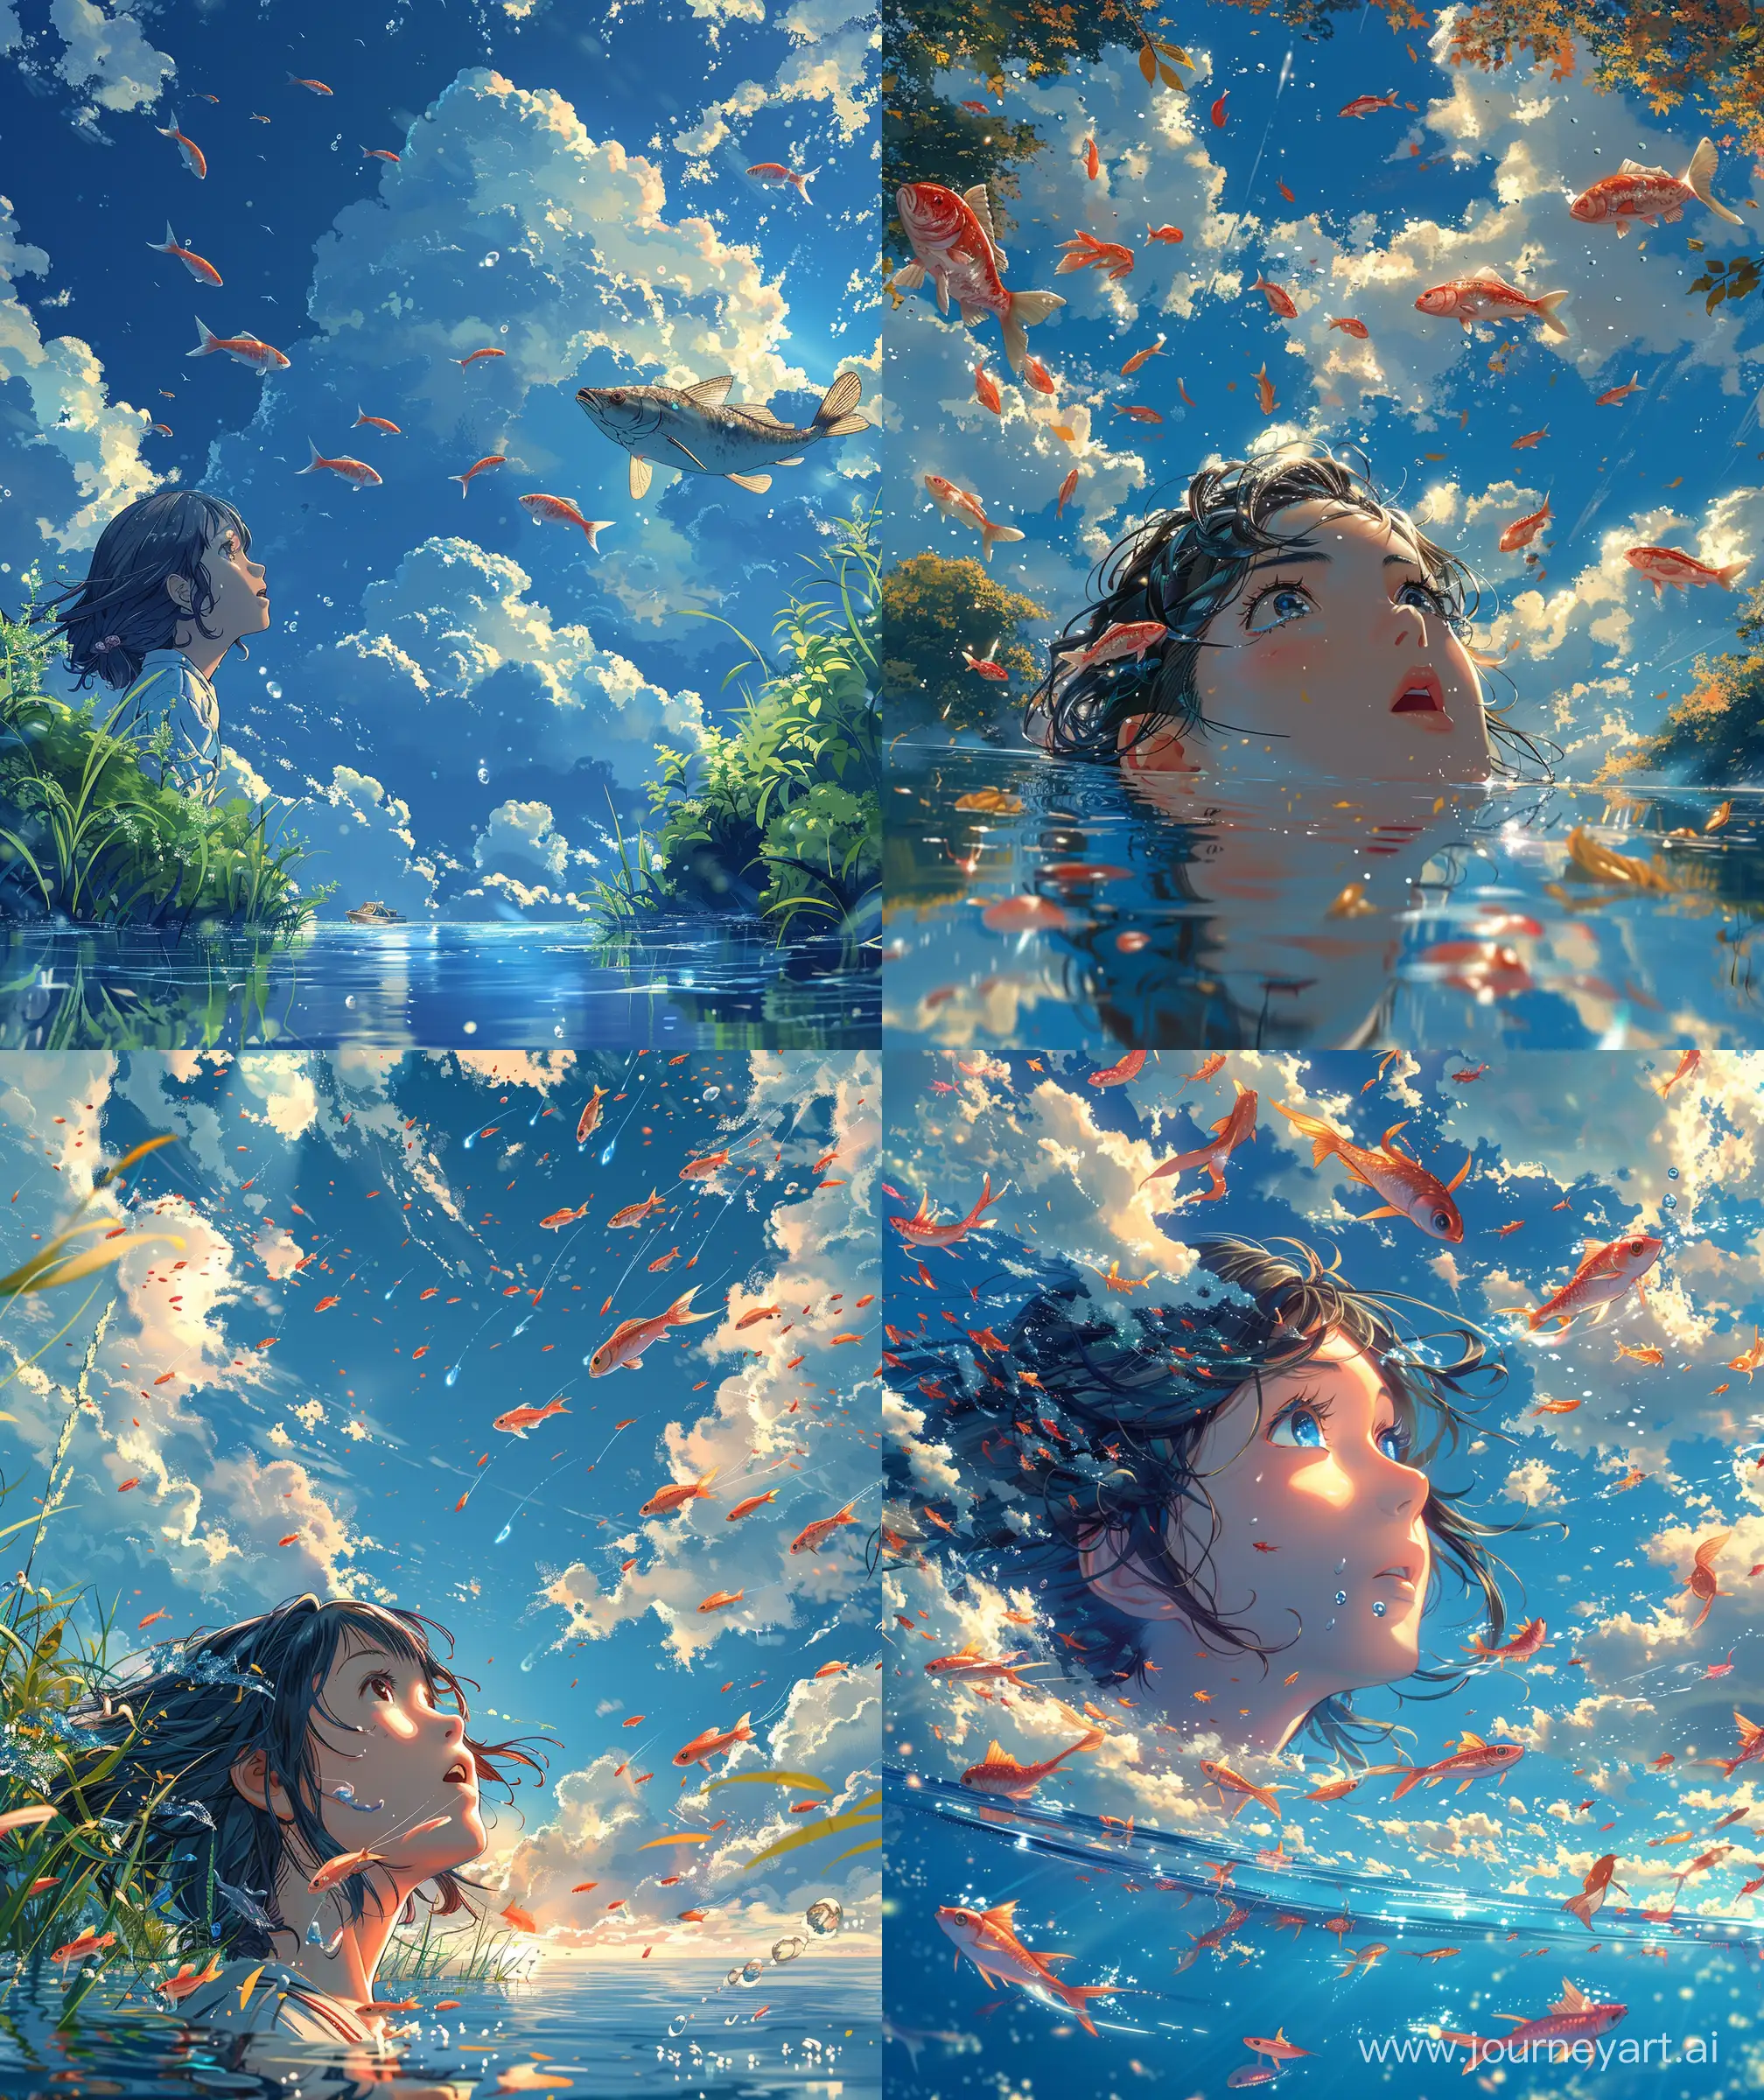 Beautiful anime scenary,mokoto shinkai style, cloud man, sky escape view, beautiful flying fish over sky, magical look, amazing clouds style, girl look above from calm water ,breeze, illustration, close up view, ultra HD, "high quality", sharp details, no hyperrealistic --ar 27:32 --s 400